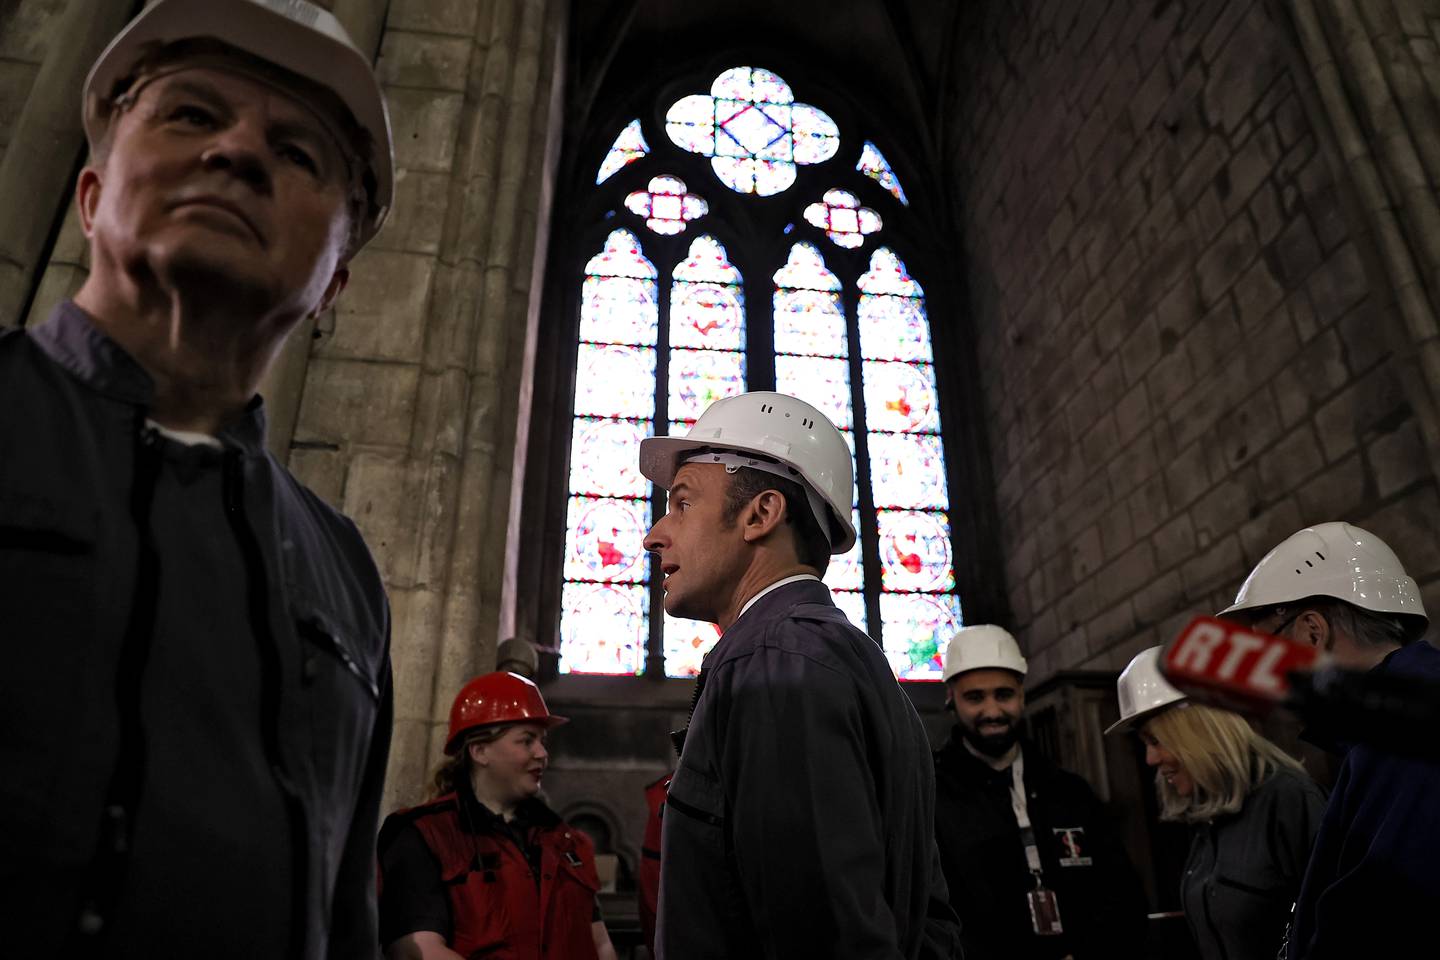 French President Emmanuel Macron, center, and French Army General Jean-Louis Georgelin, left, in charge of Notre-Dame Cathedral reconstruction, visit the reconstruction site of the Notre-Dame de Paris cathedral, Friday, April 15, 2022 in Paris, to mark three years since the devastating fire. (Ian Langsdon, Pool via AP)